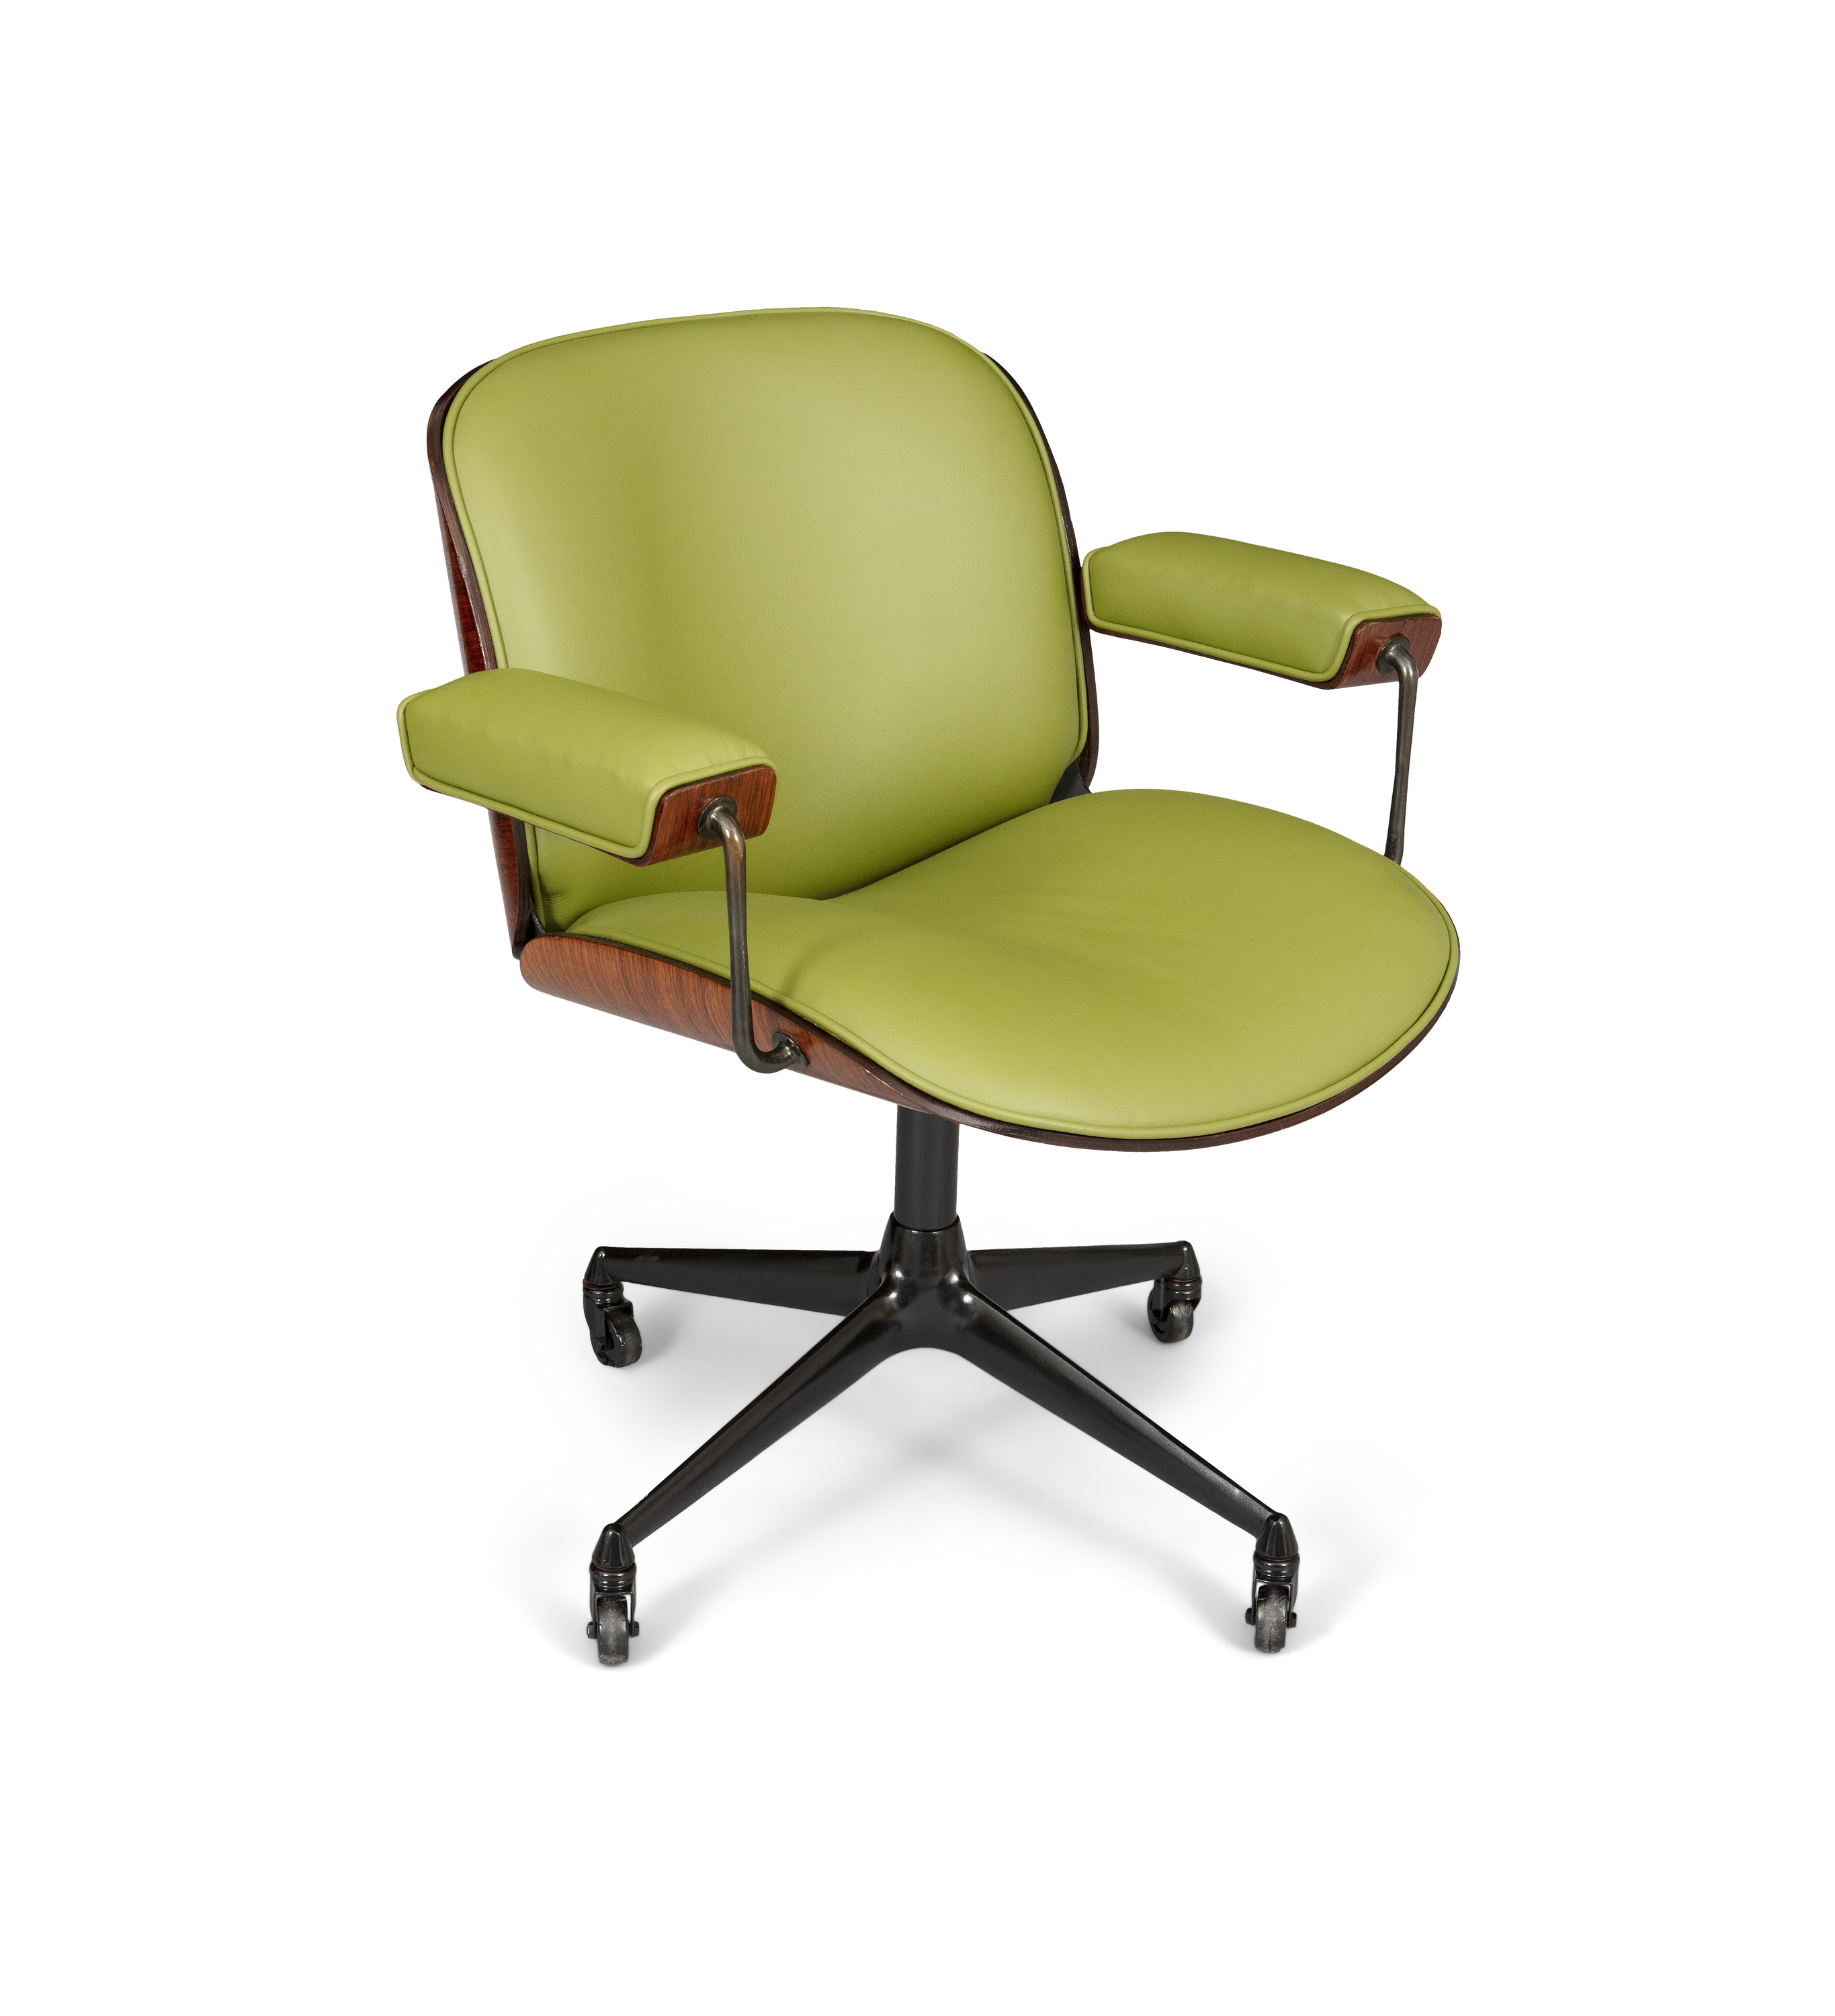 ICO PARISI A rosewood office chair with green leather upholstery by Ico Parisi for MIM, Roma. c. - Image 3 of 6